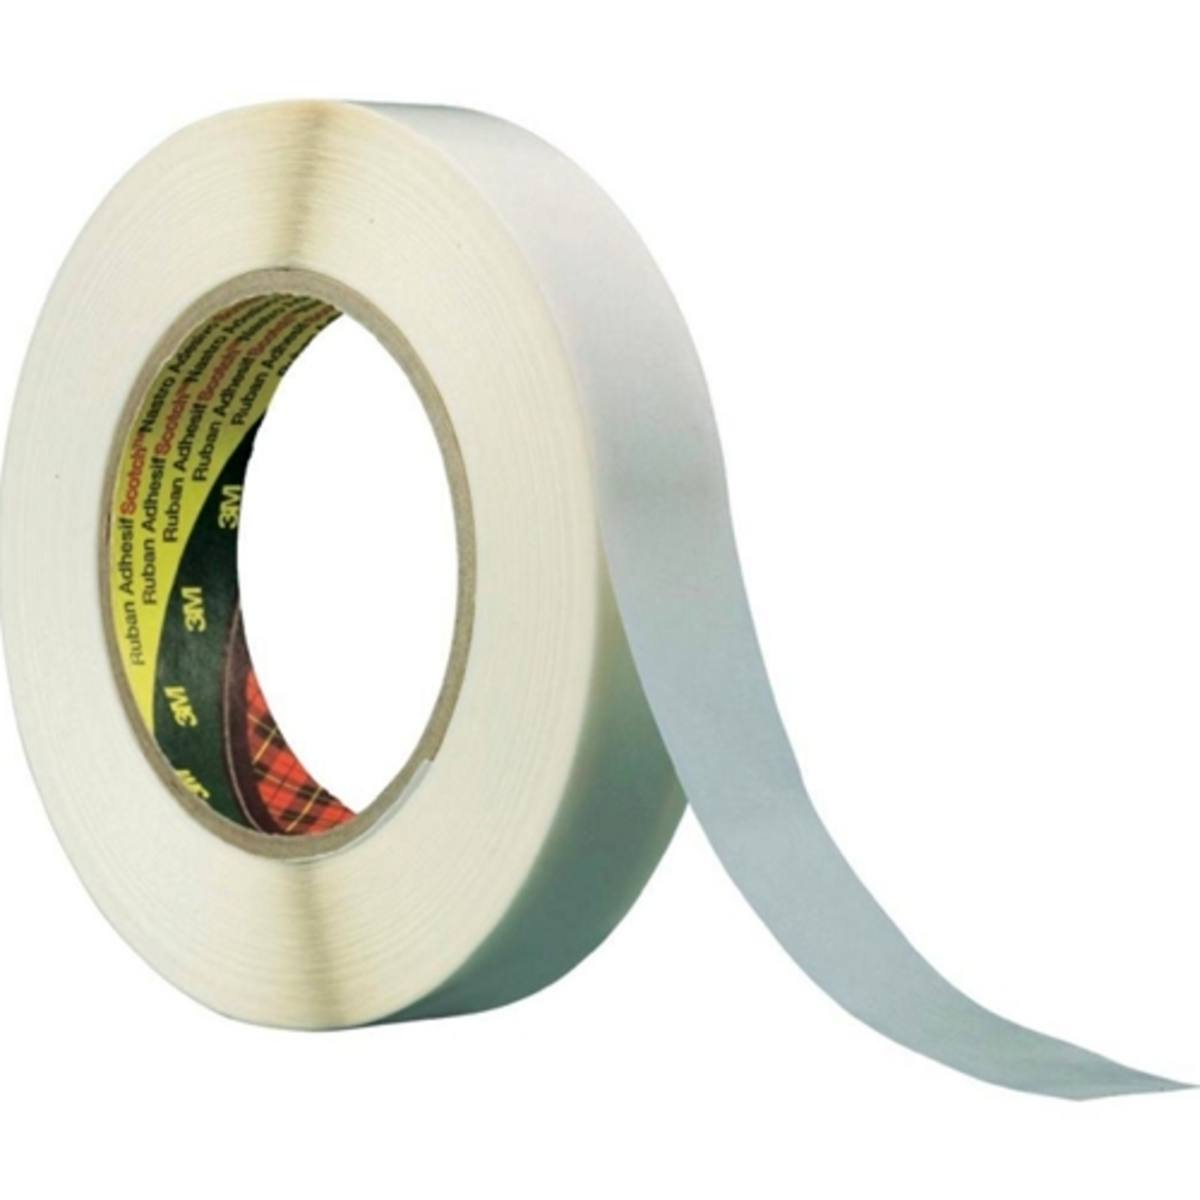 3M Double-sided adhesive tape with non-woven paper backing 9040, cream-colored, 50 mm x 50 m, 0.1 mm